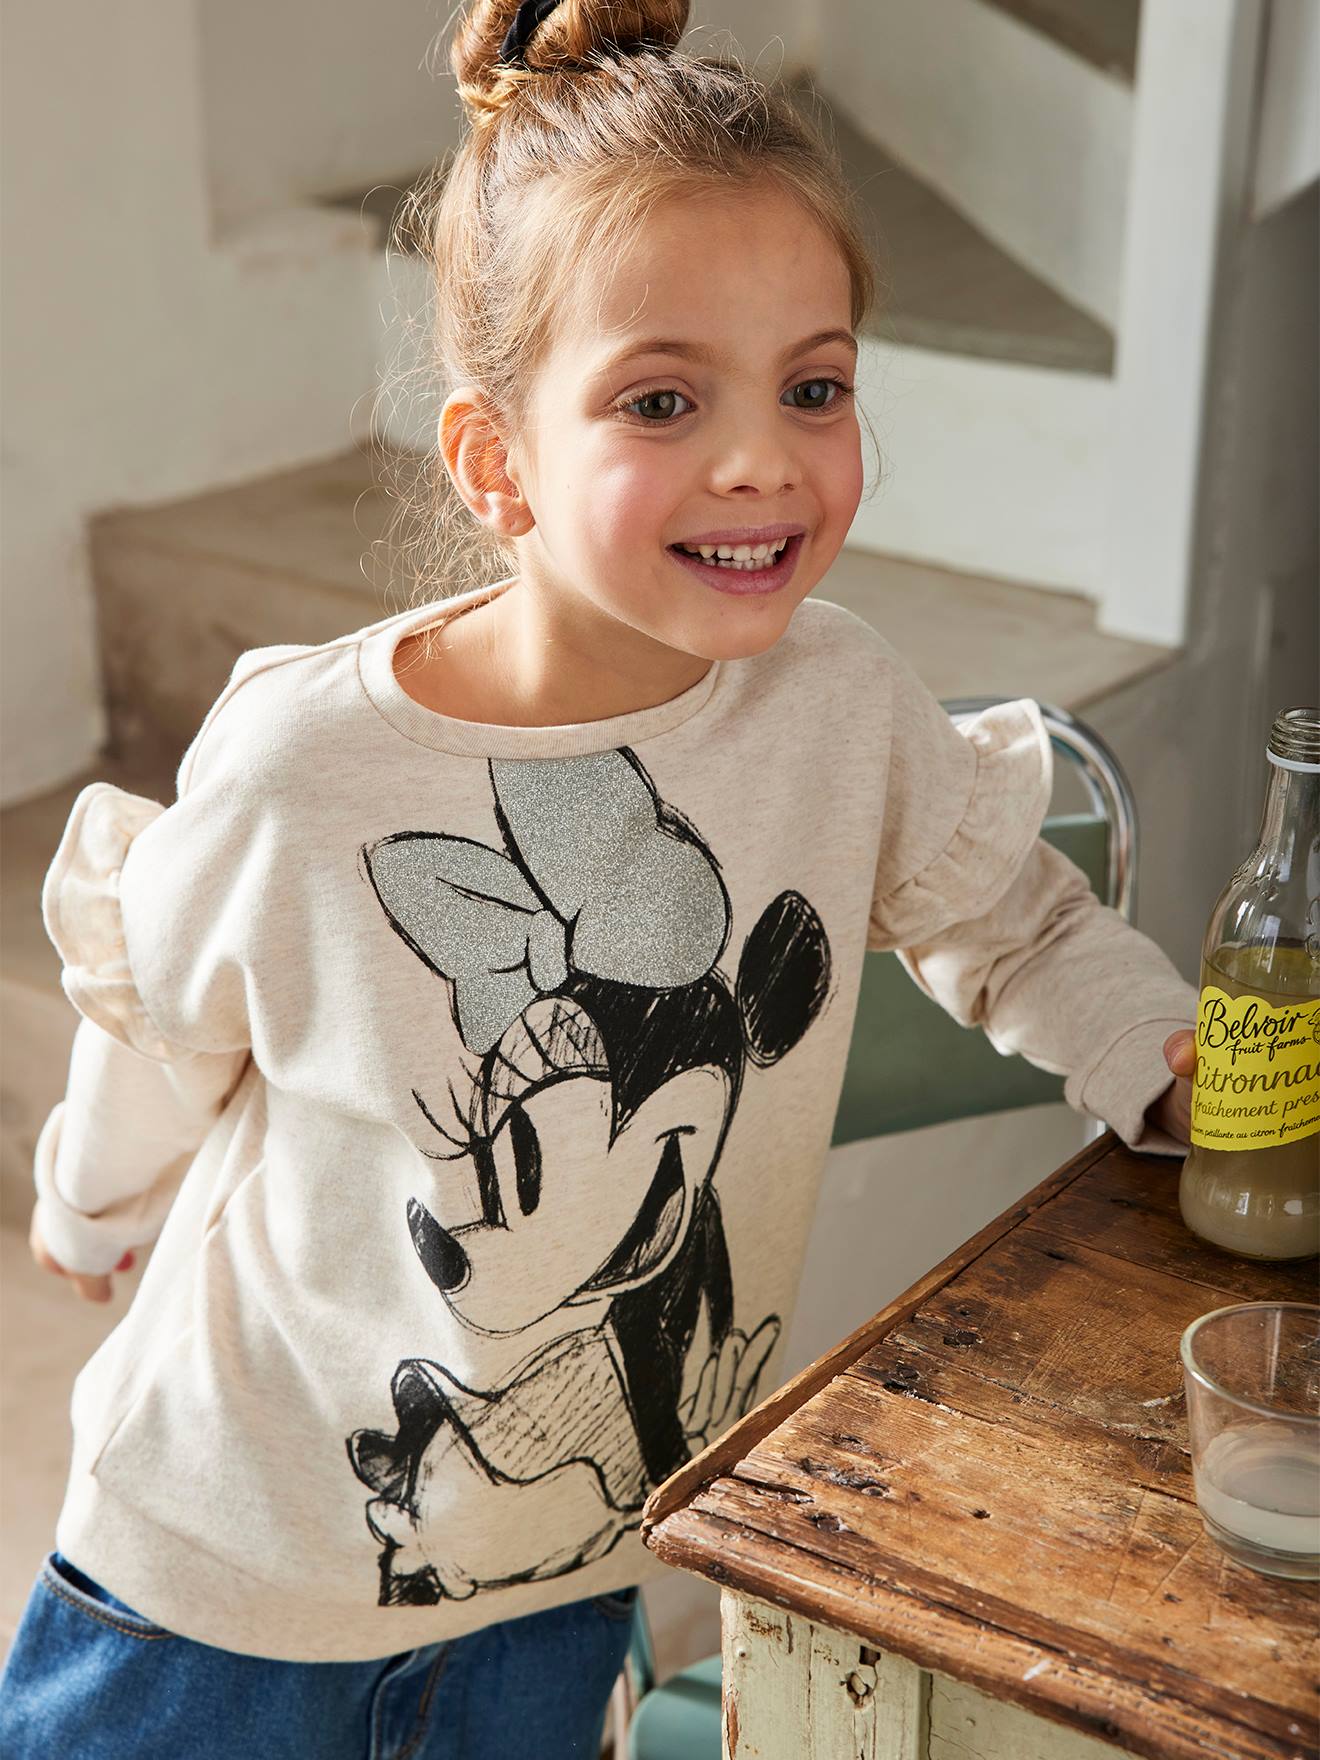 White/Black Hearts Design Sweatshirt for Girls Minnie Mouse Disney Long Sleeved Top 